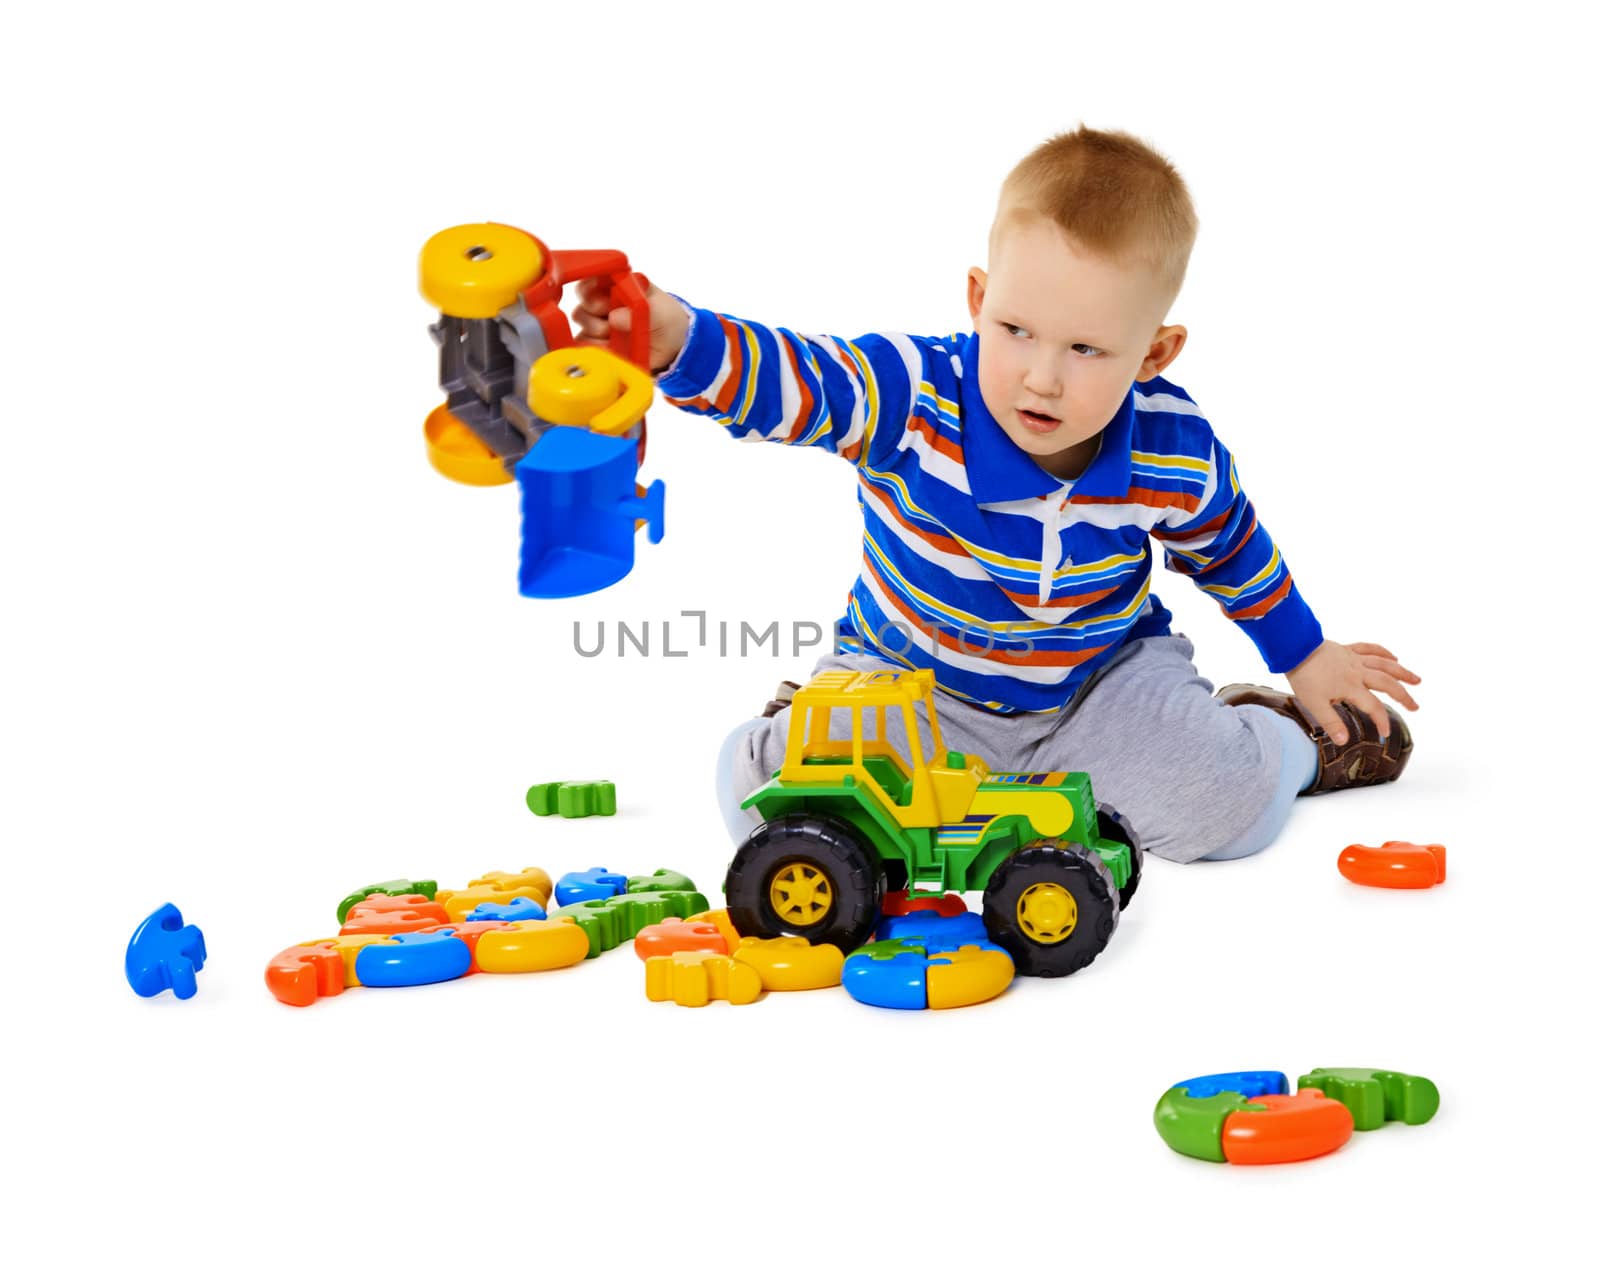 Little boy playing actively with plastic toys by pzaxe